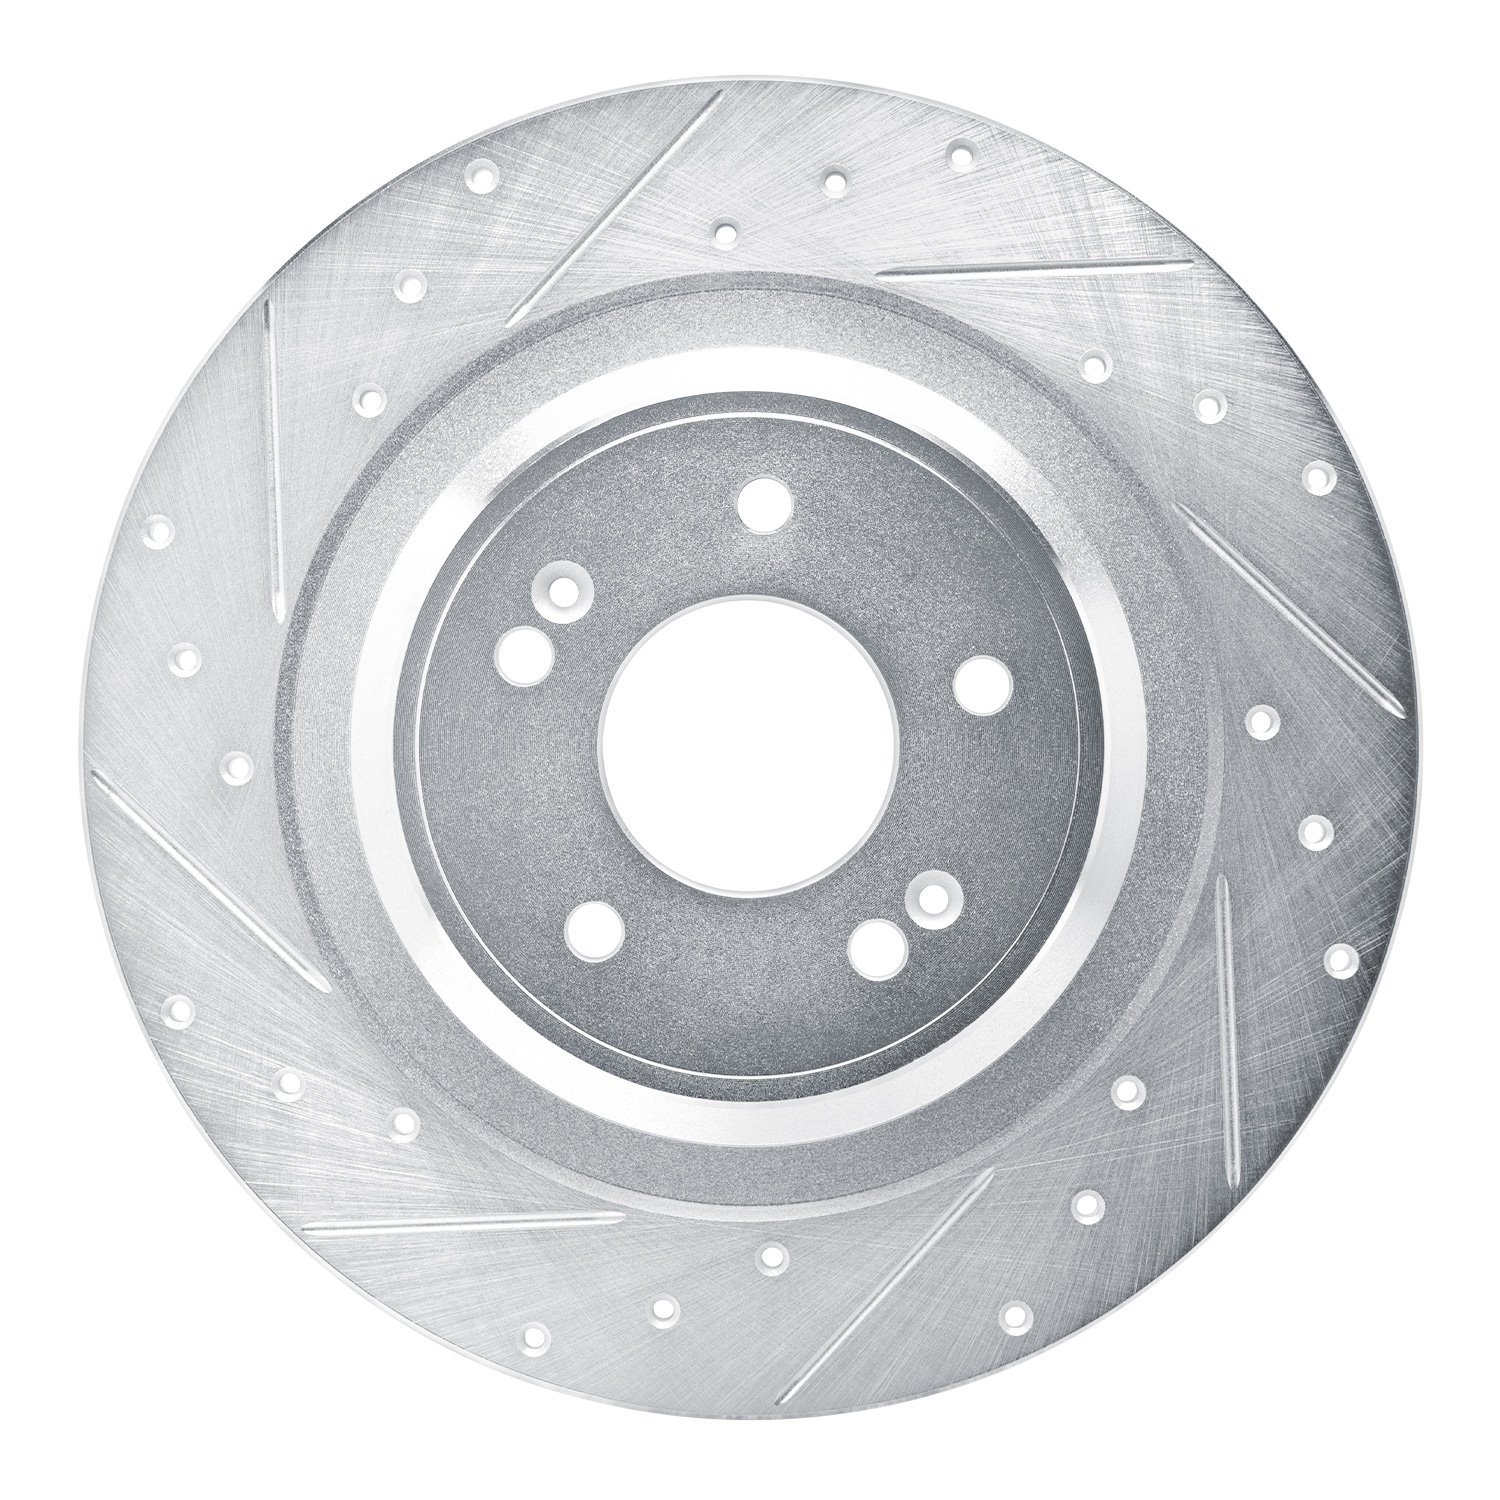 631-21051L Drilled/Slotted Brake Rotor [Silver], Fits Select Kia/Hyundai/Genesis, Position: Rear Left